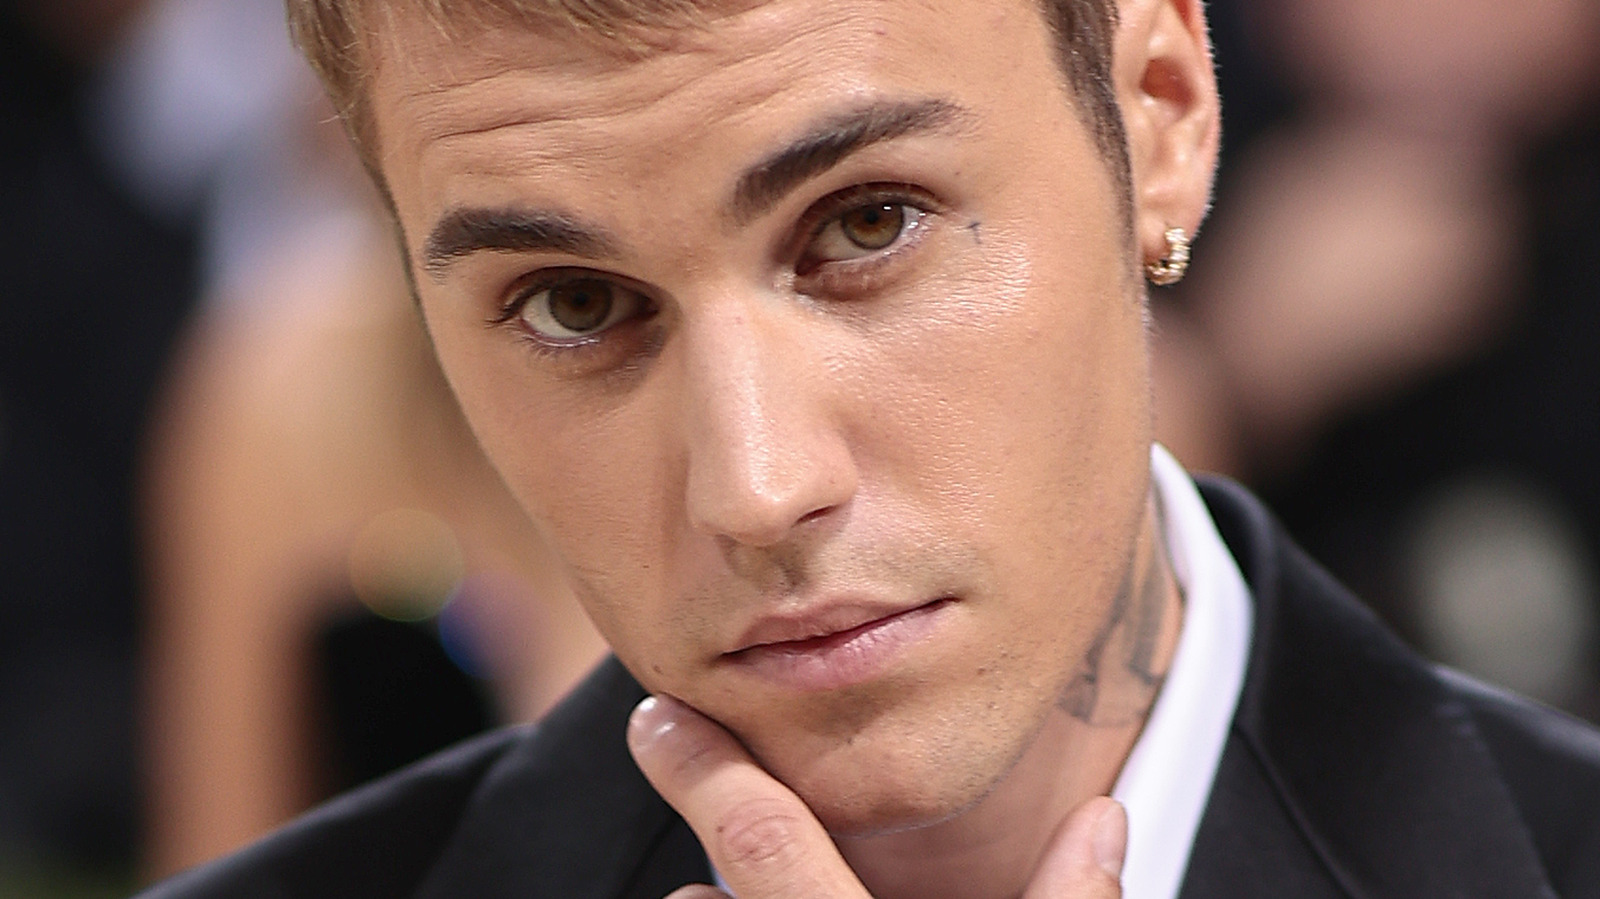 Justin Bieber's latest expensive purchase has everyone saying the same thing